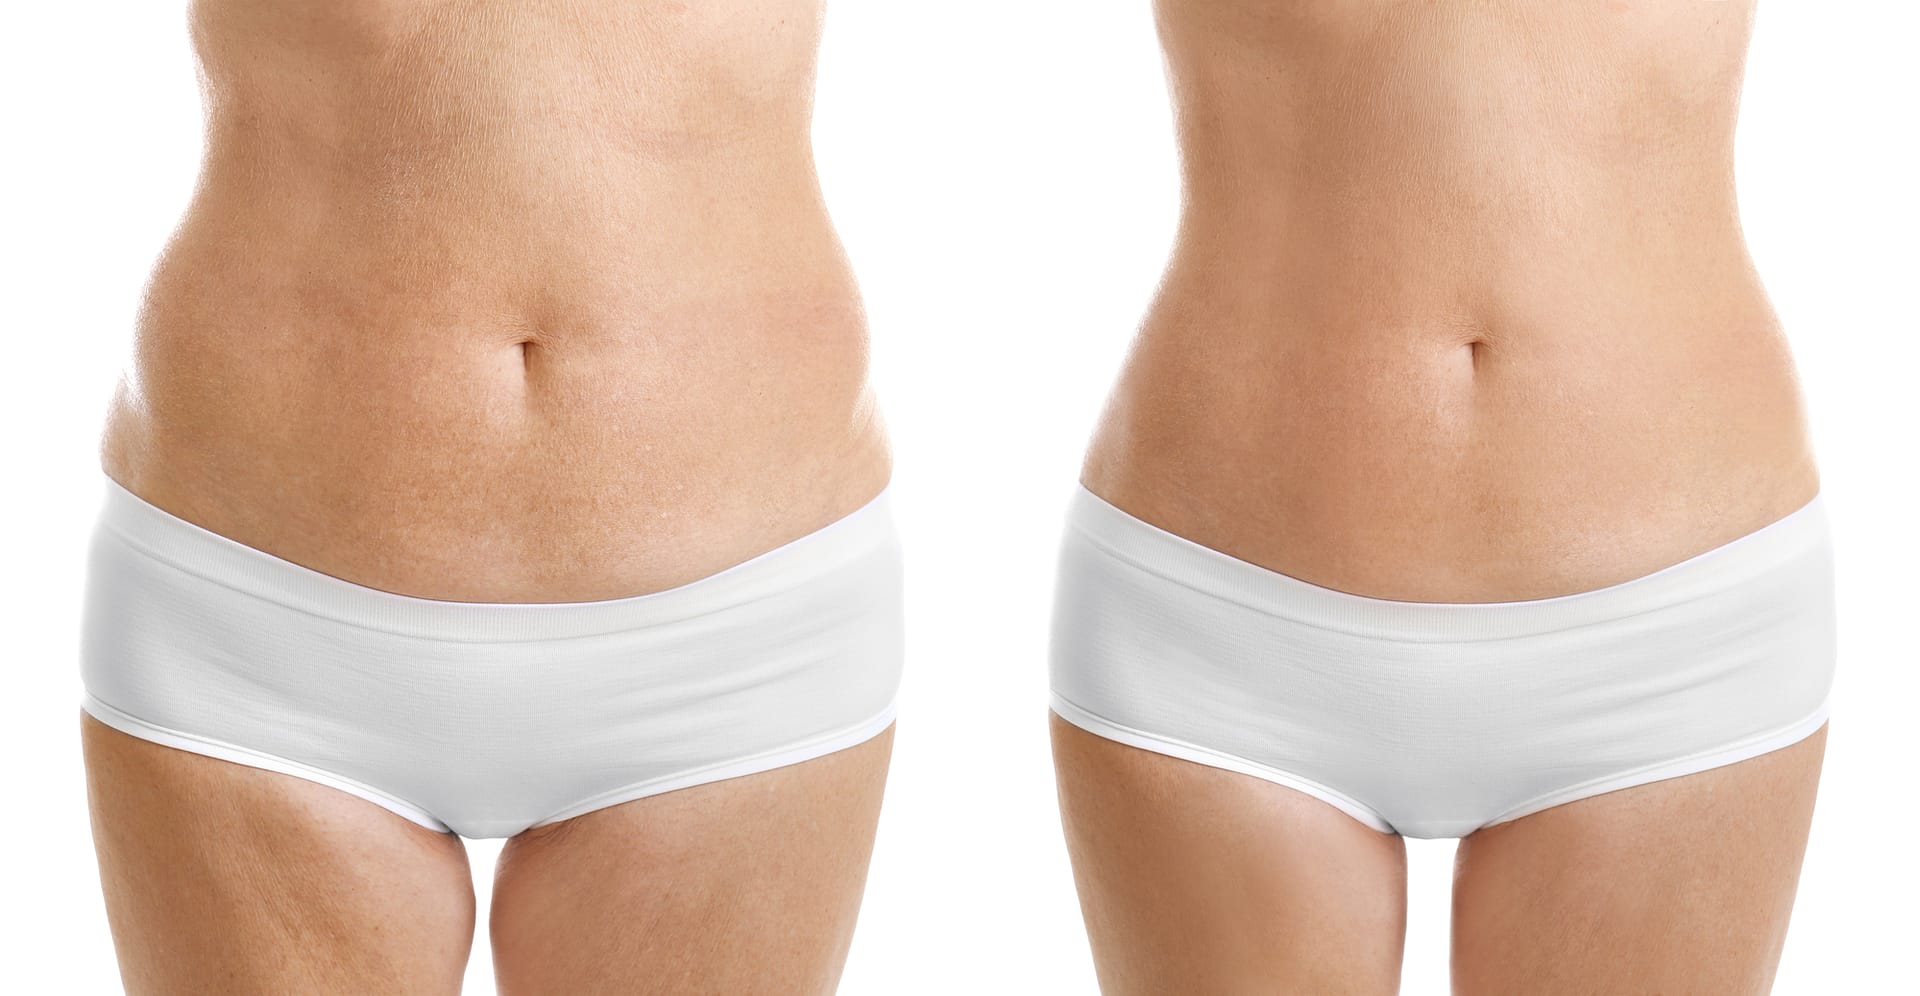 Tummy Tuck vs. Liposuction: What's the difference?